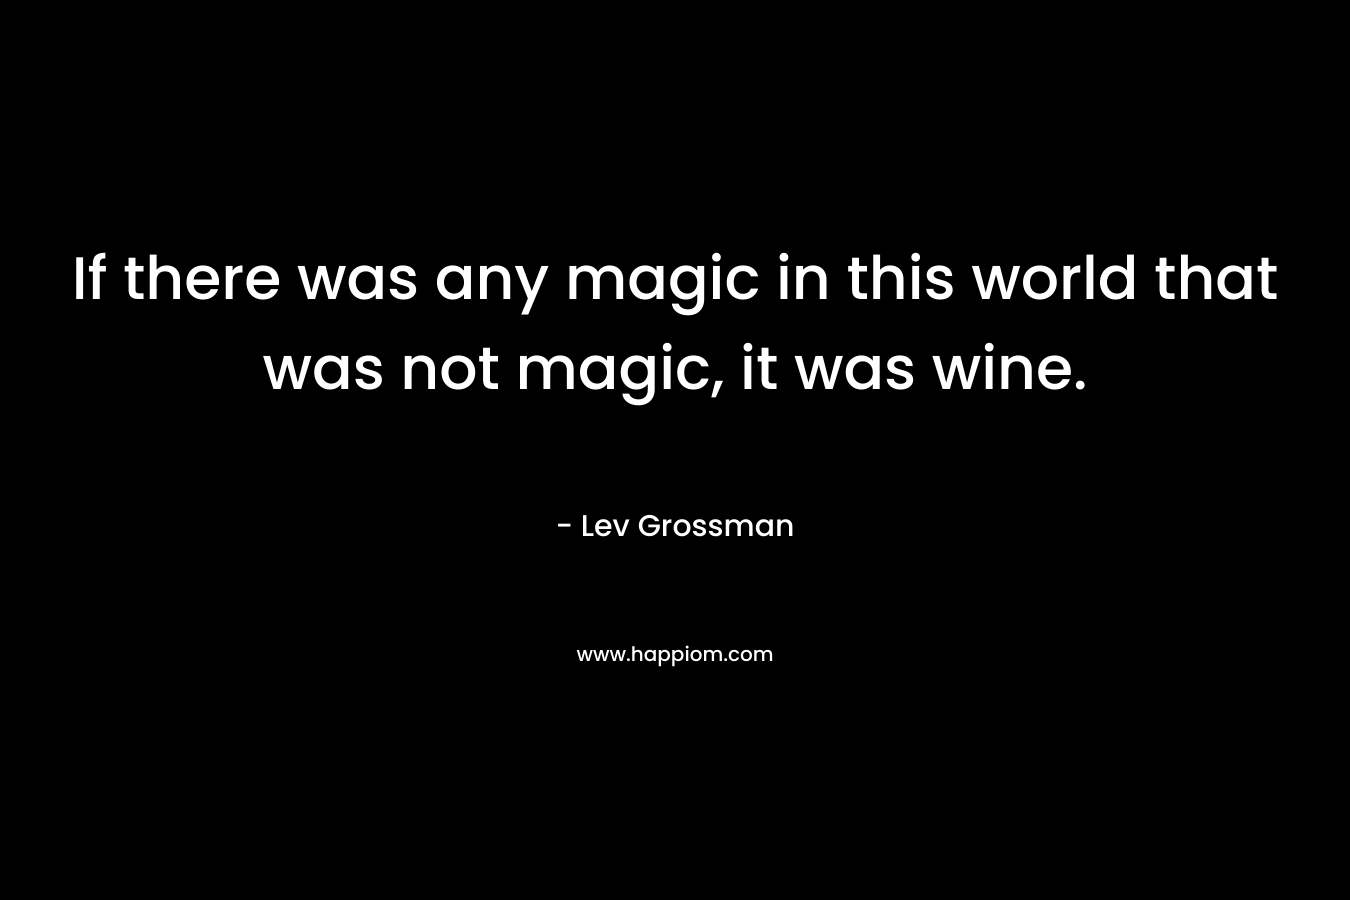 If there was any magic in this world that was not magic, it was wine. – Lev Grossman